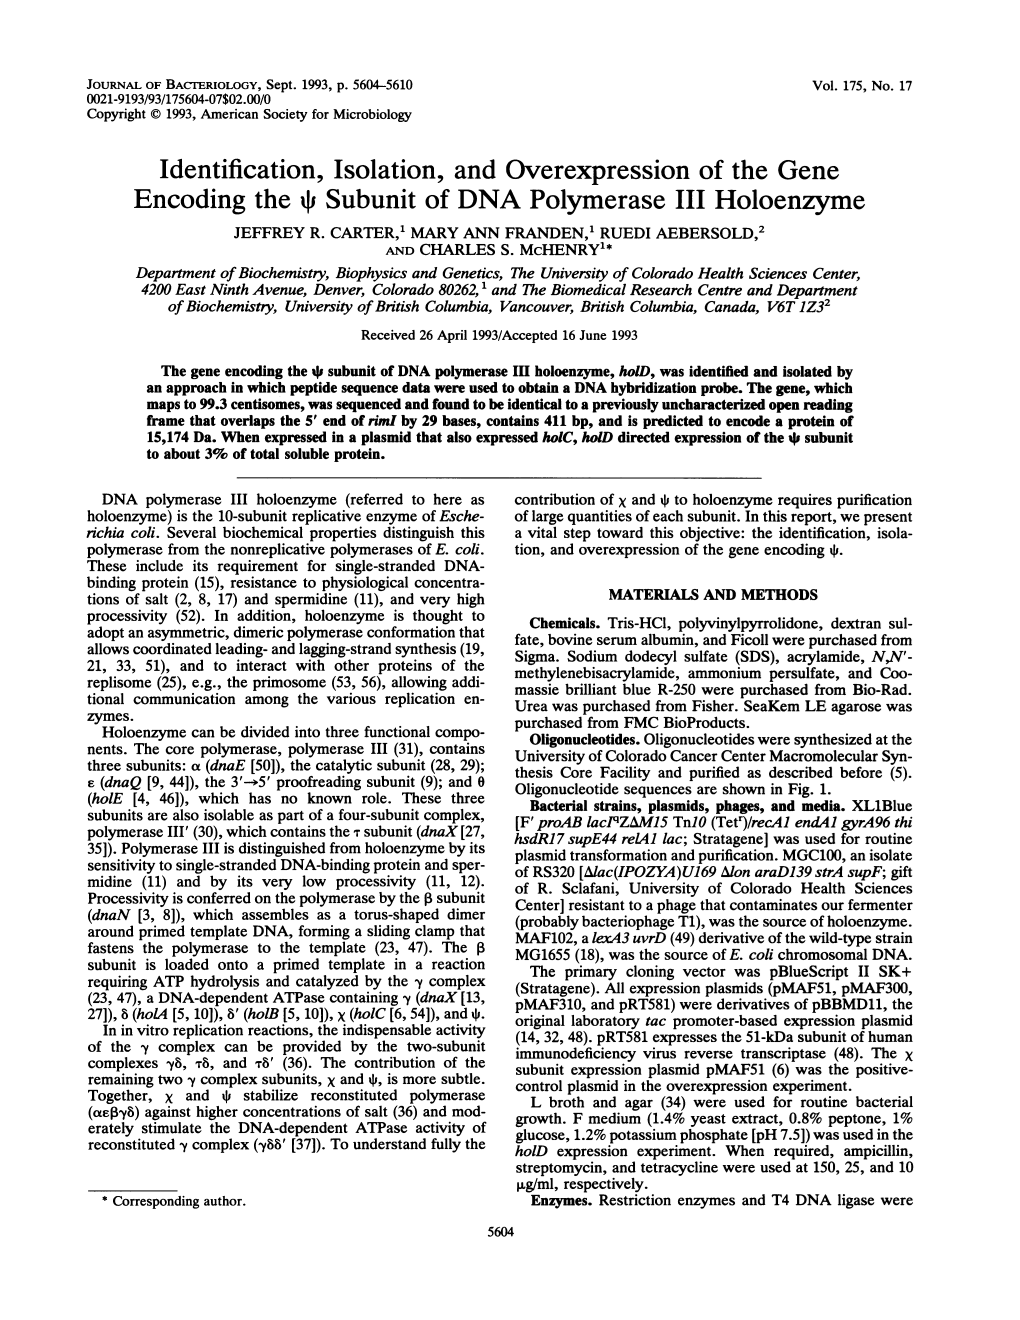 Identification, Isolation, and Overexpression of the Gene Encoding the * Subunit of DNA Polymerase III Holoenzyme JEFFREY R